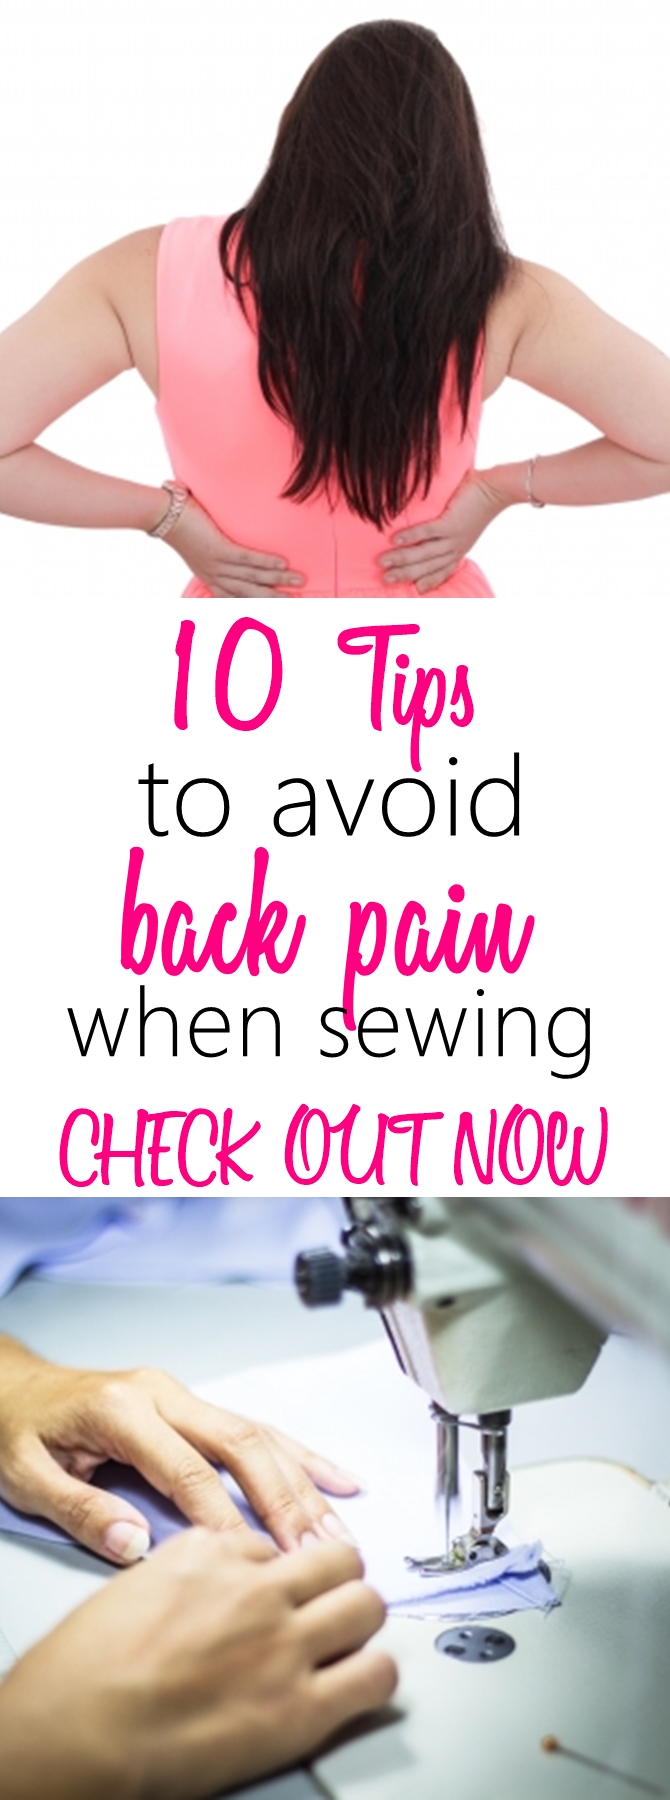 10 AMAZING Tips to Avoid Back Pain While Sewing that totally work!